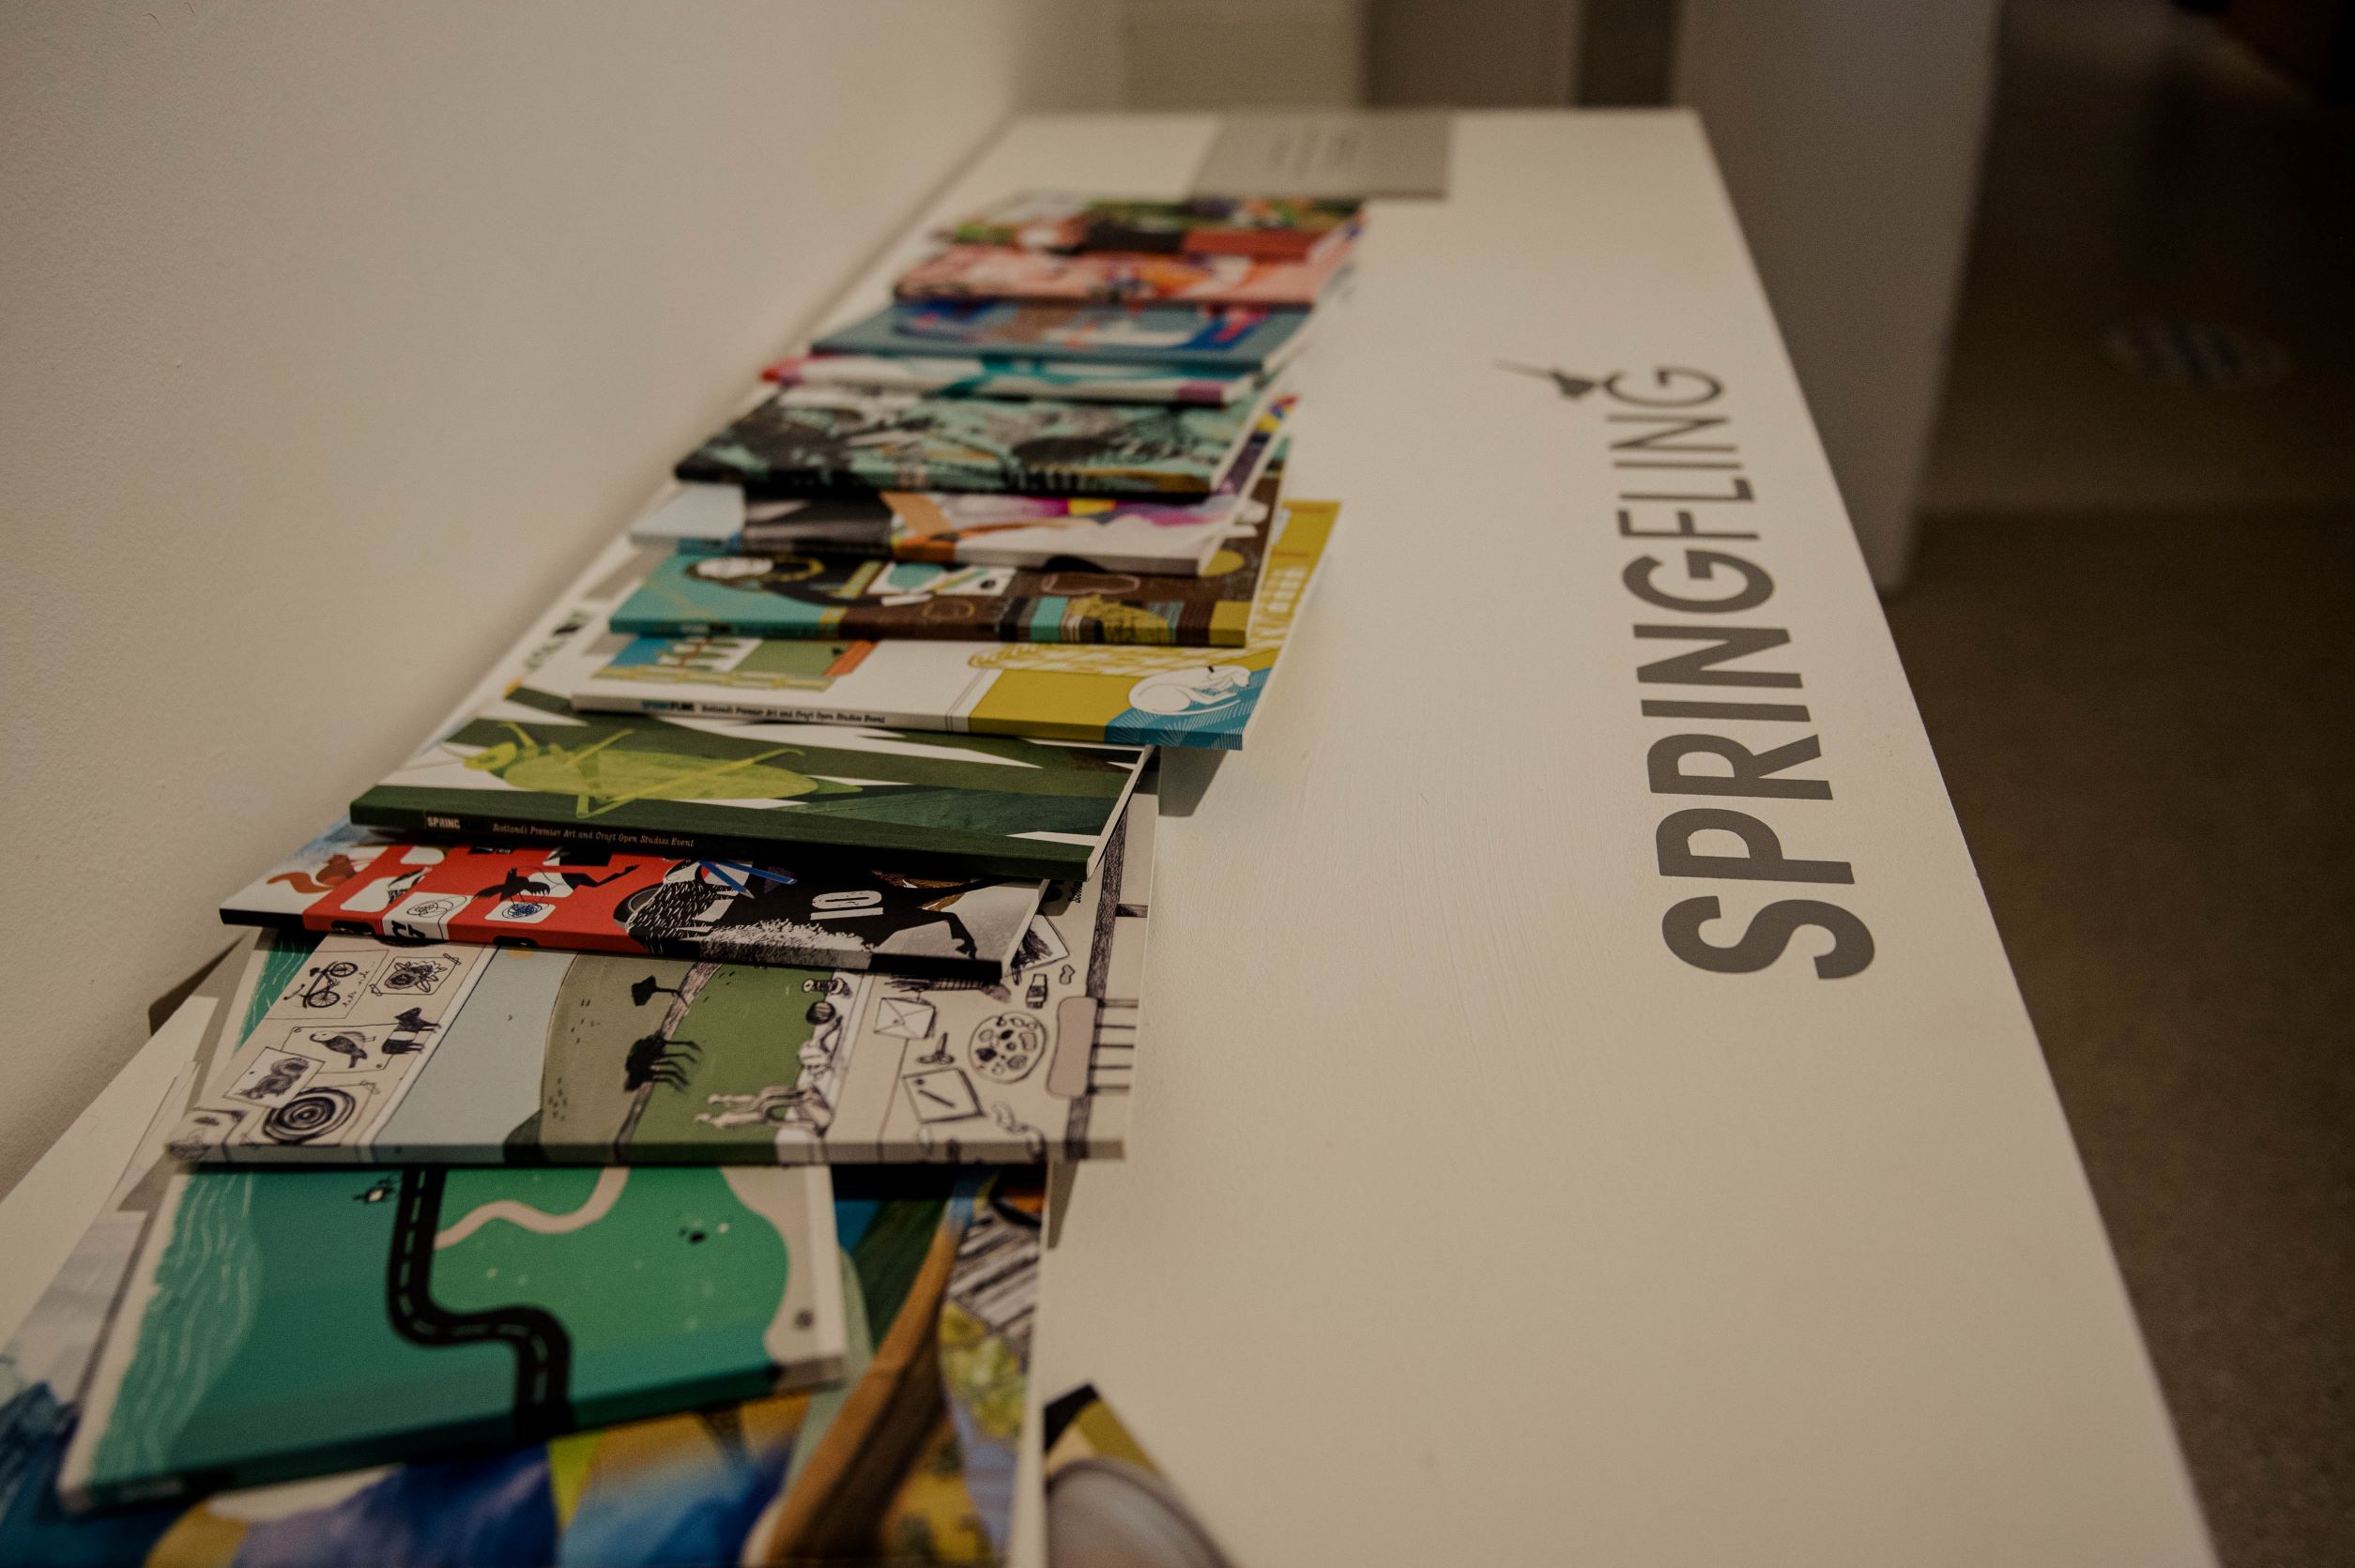 Spring Fling brochures from across the years spread across table at Spring Fling retrospective exhibition